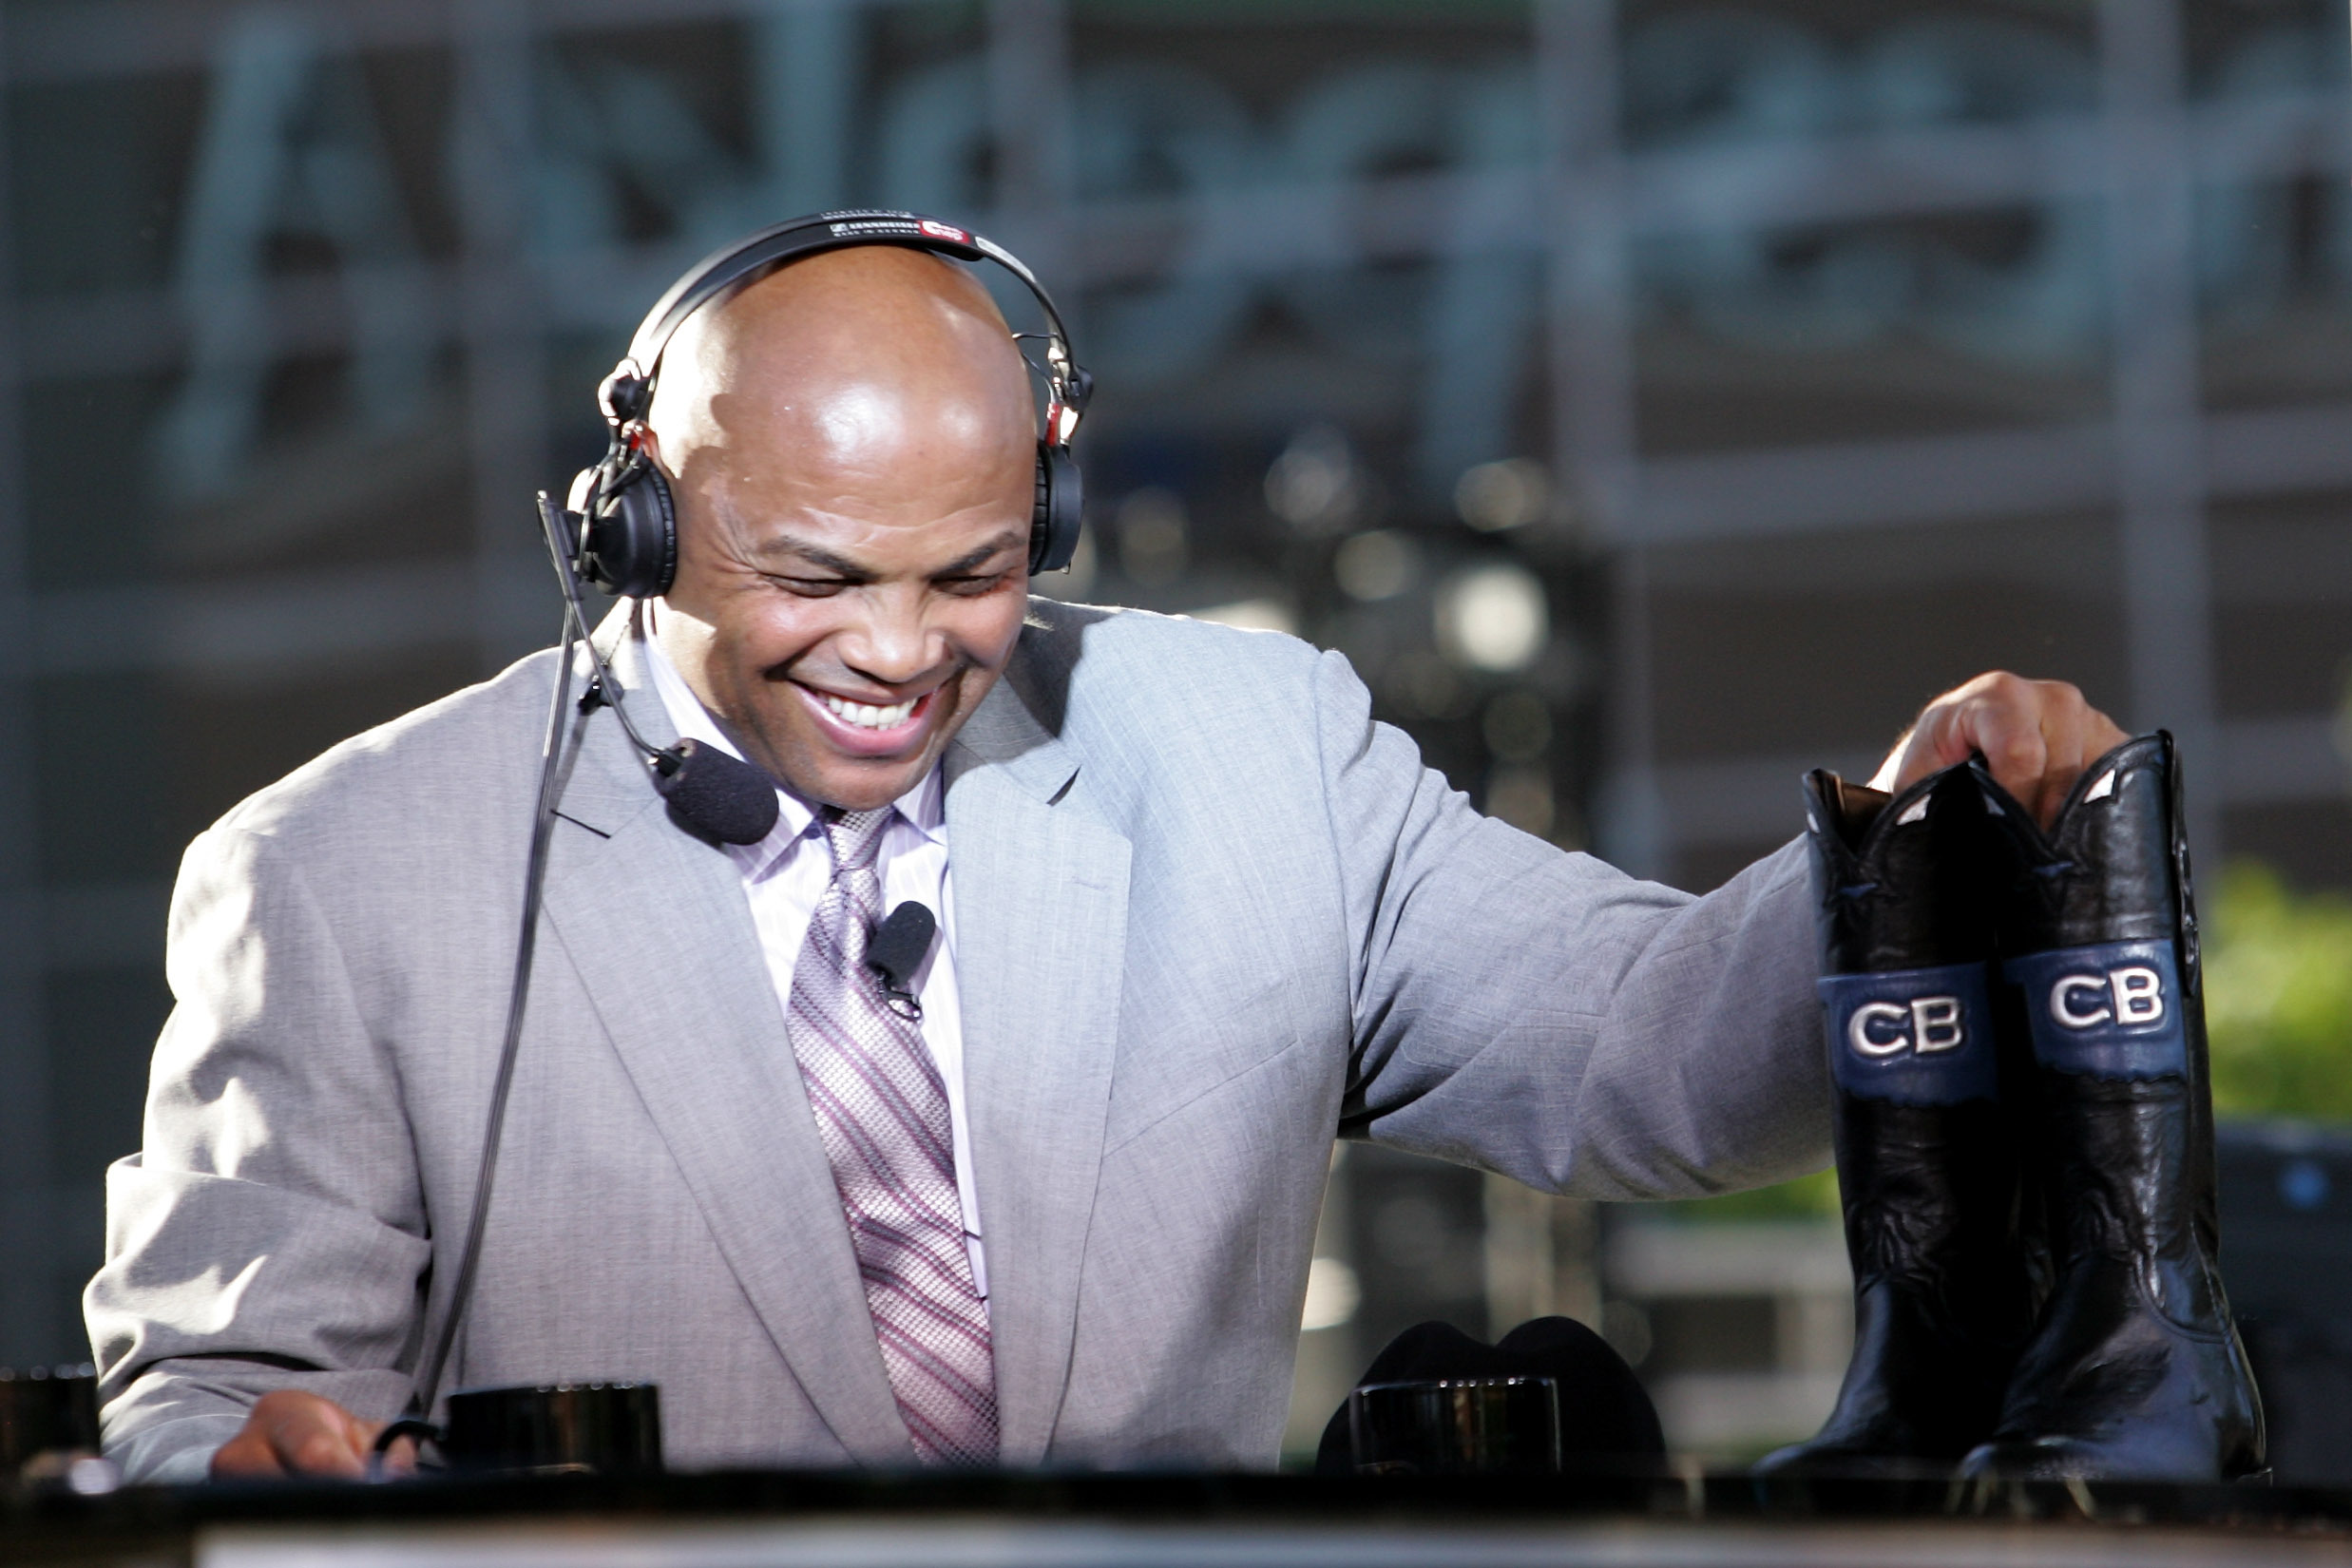 Charles Barkley Hints at Job Hunt What's Next for 'Inside The NBA' Amid Broadcast Changes---